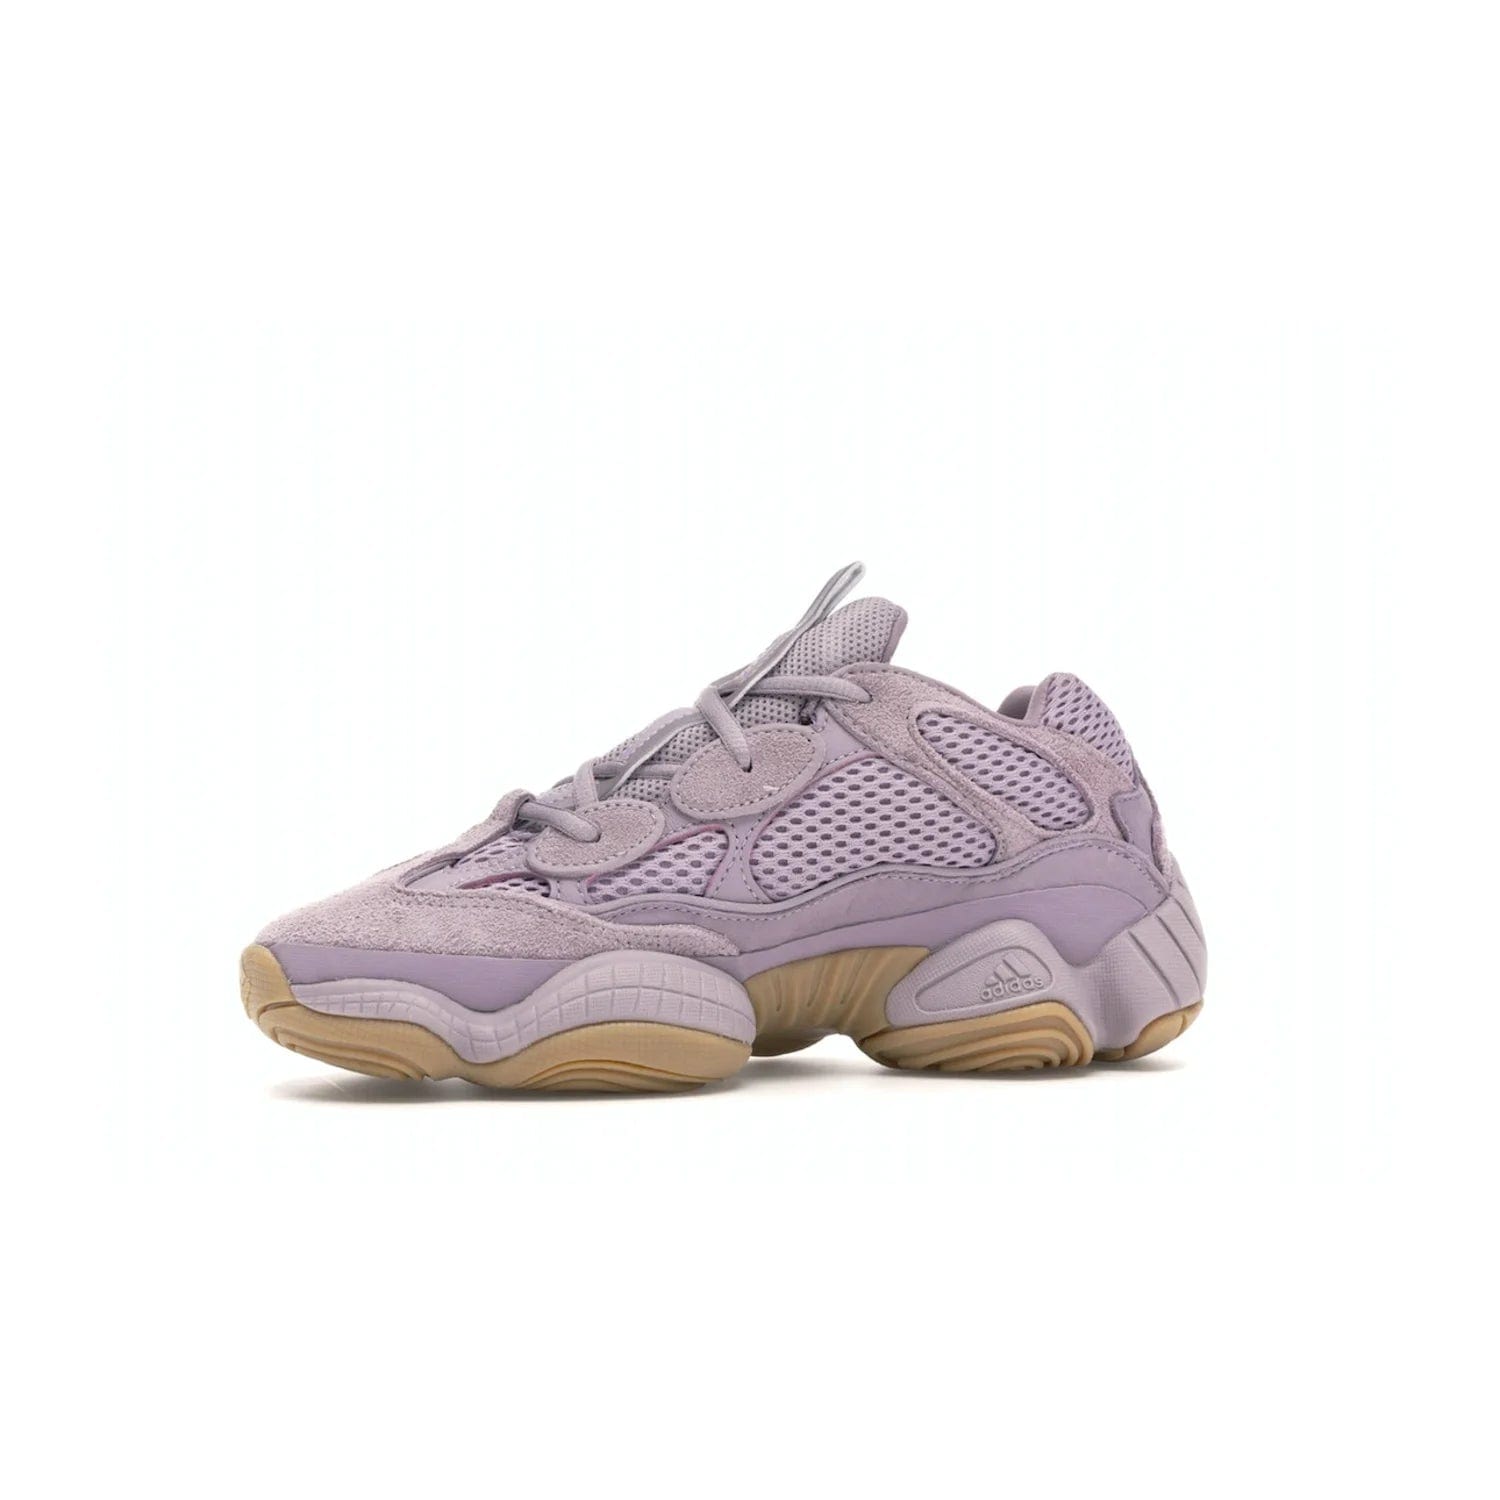 adidas Yeezy 500 Soft Vision - Image 17 - Only at www.BallersClubKickz.com - New adidas Yeezy 500 Soft Vision sneaker featuring a combination of mesh, leather, and suede in a classic Soft Vision colorway. Gum rubber outsole ensures durability and traction. An everyday sneaker that stands out from the crowd.